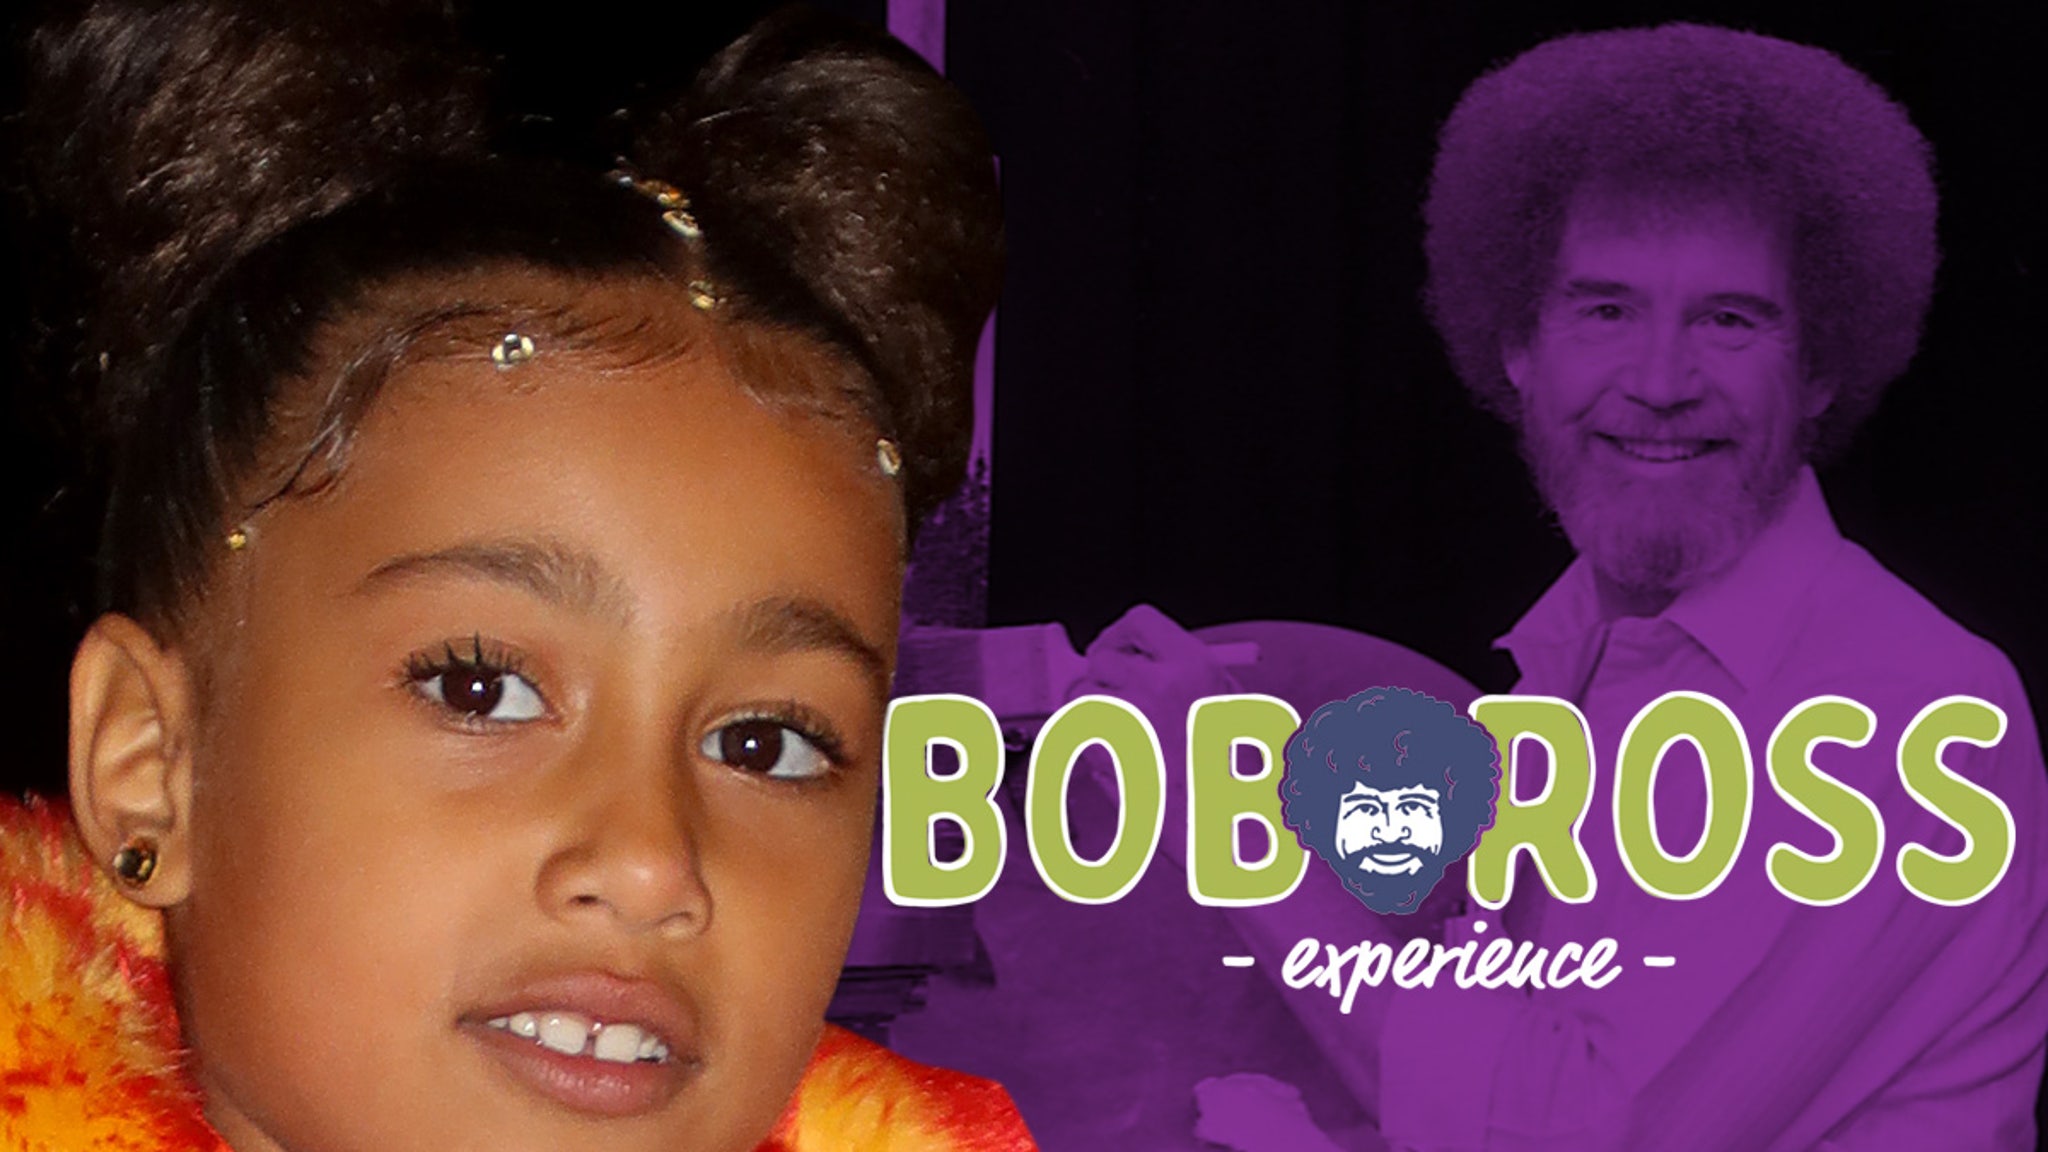 North West gets Bob Ross’ experience after haters question his skill